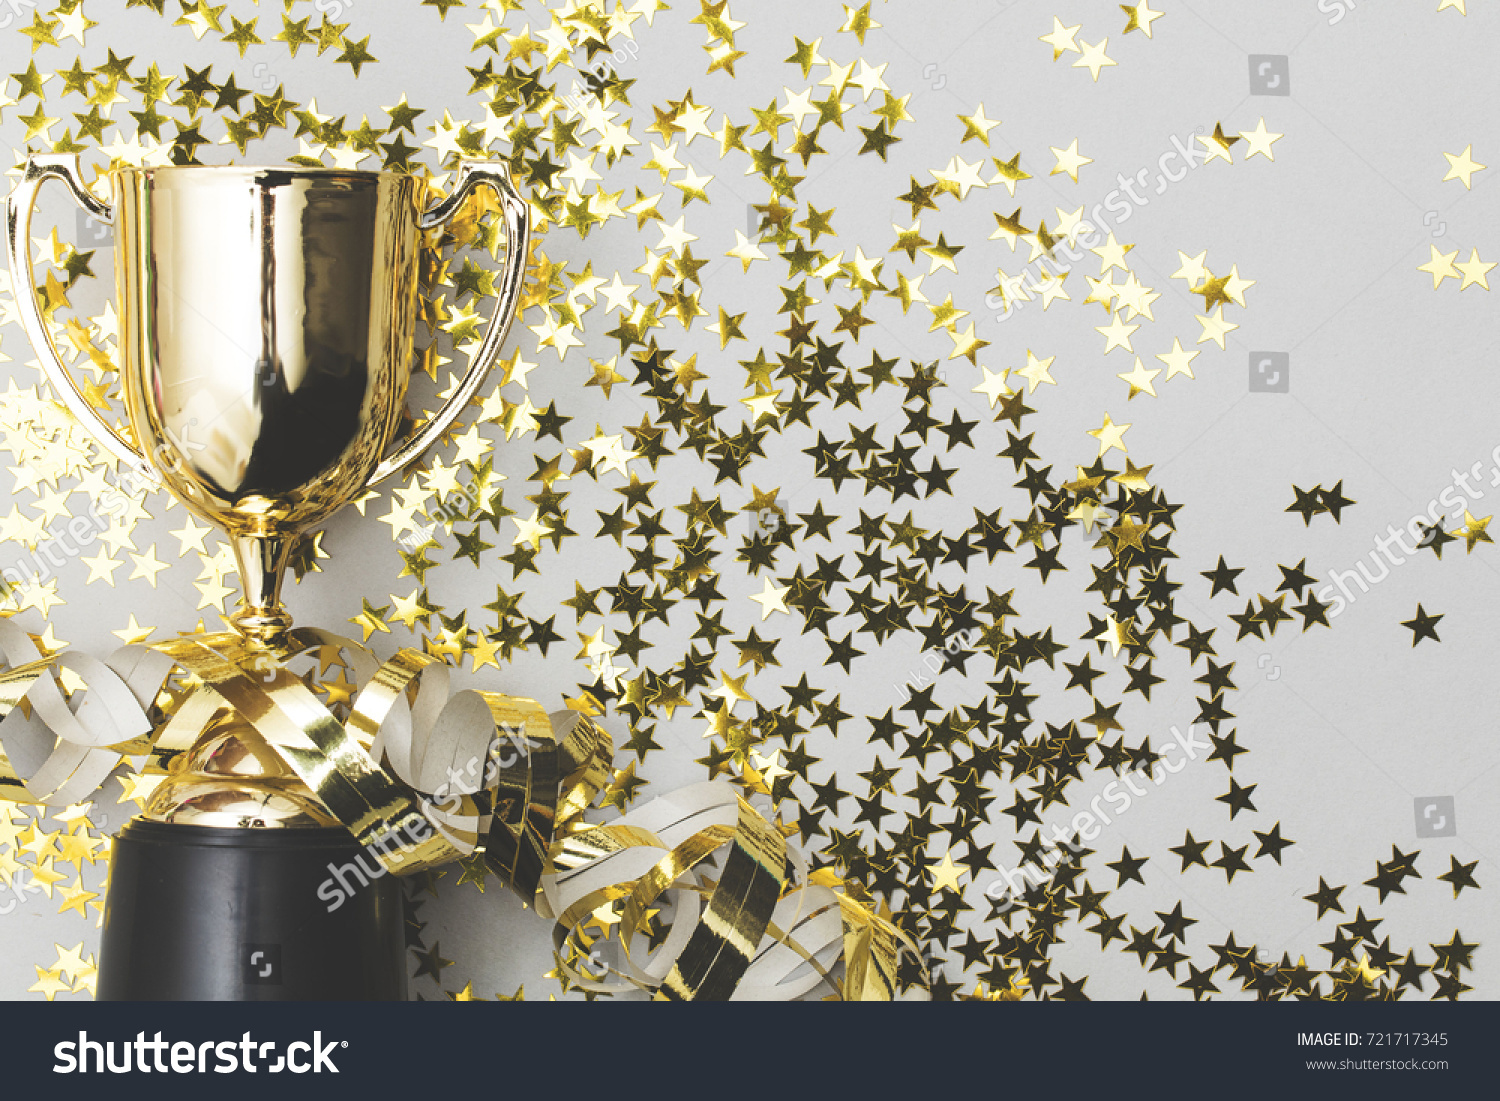 Gold winners trophy with golden shiny stars #721717345